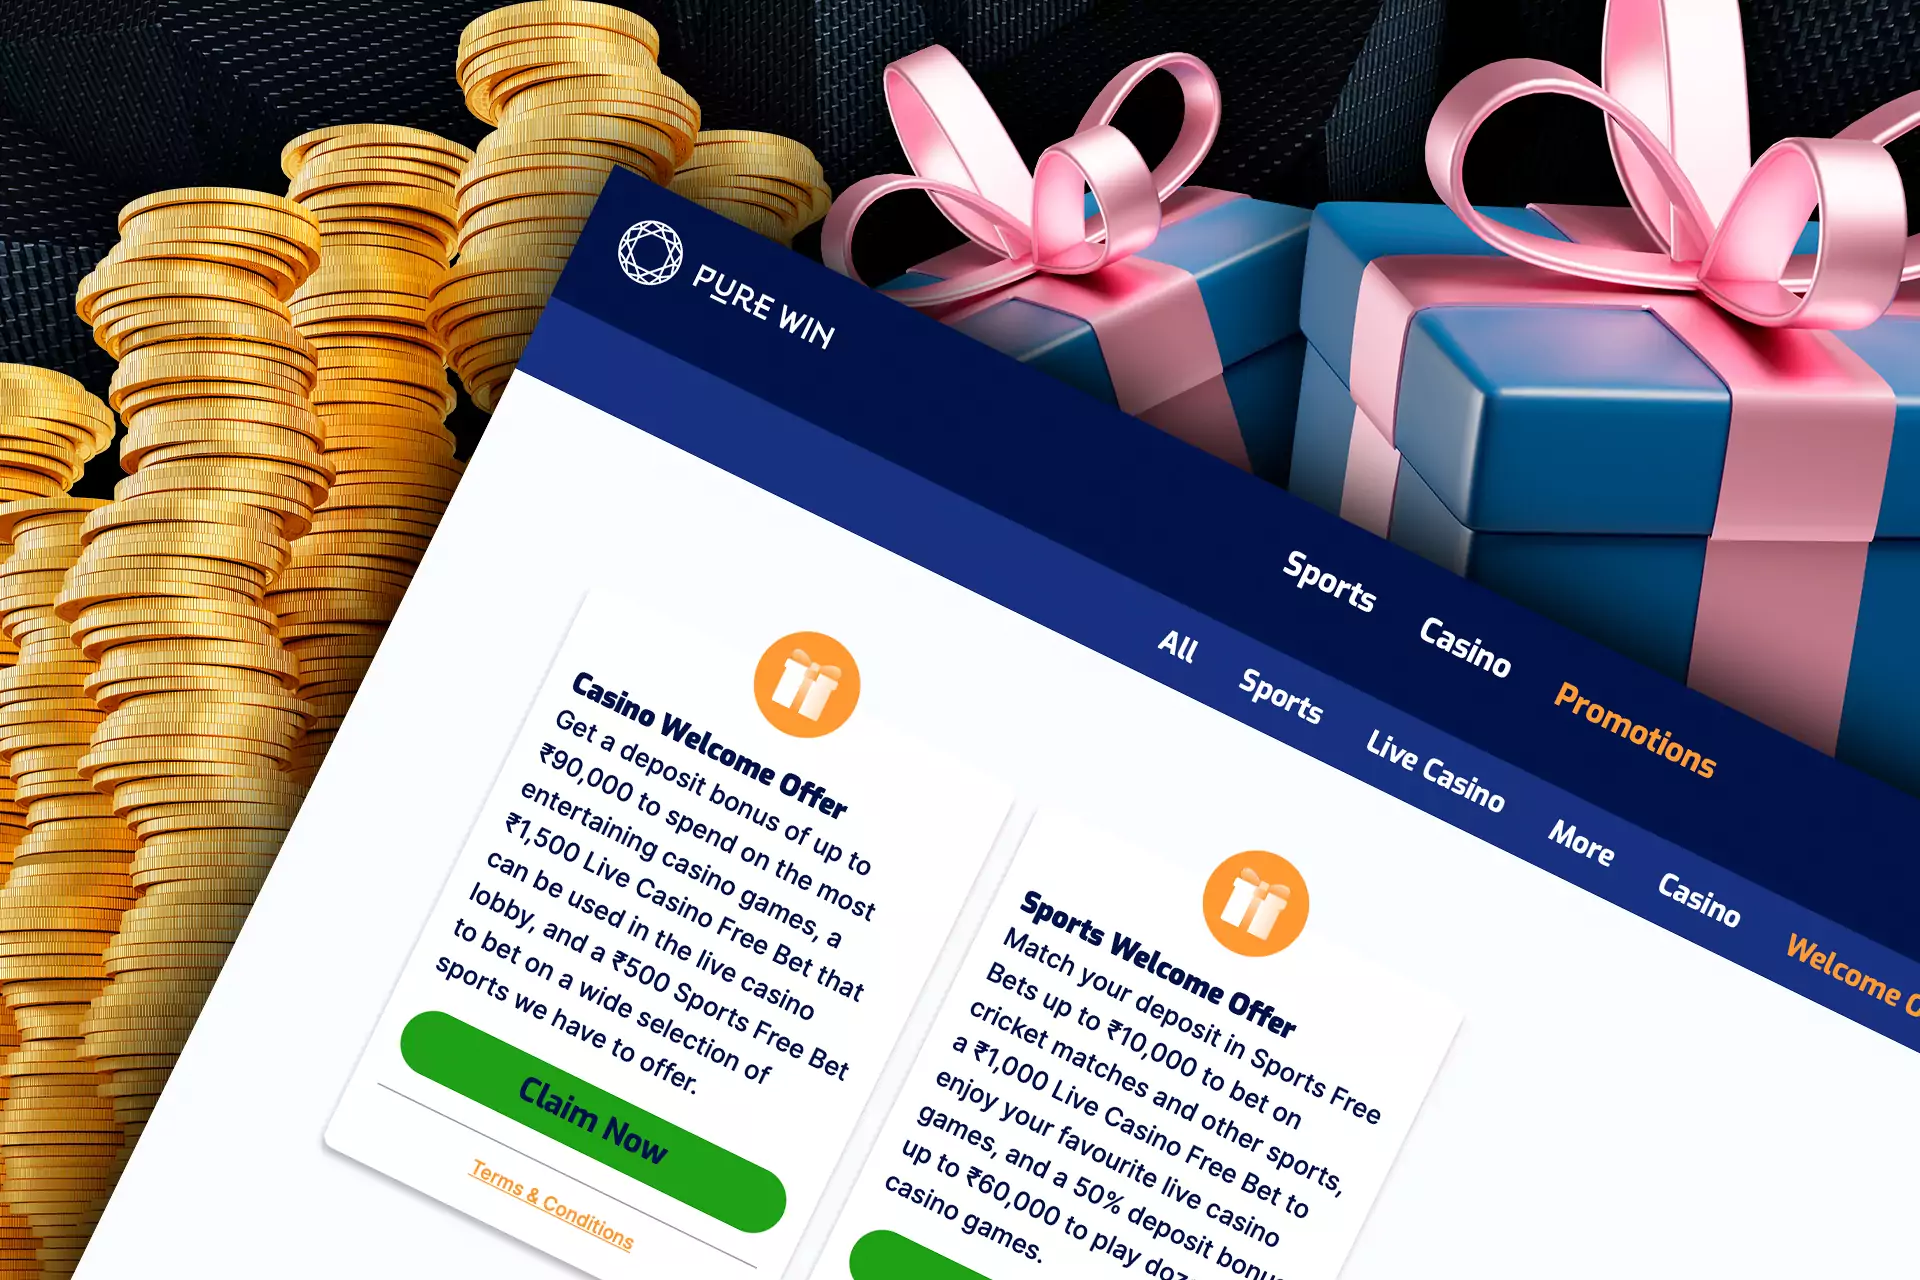 The Pure Casino Welcome Bonus is available to every new user.